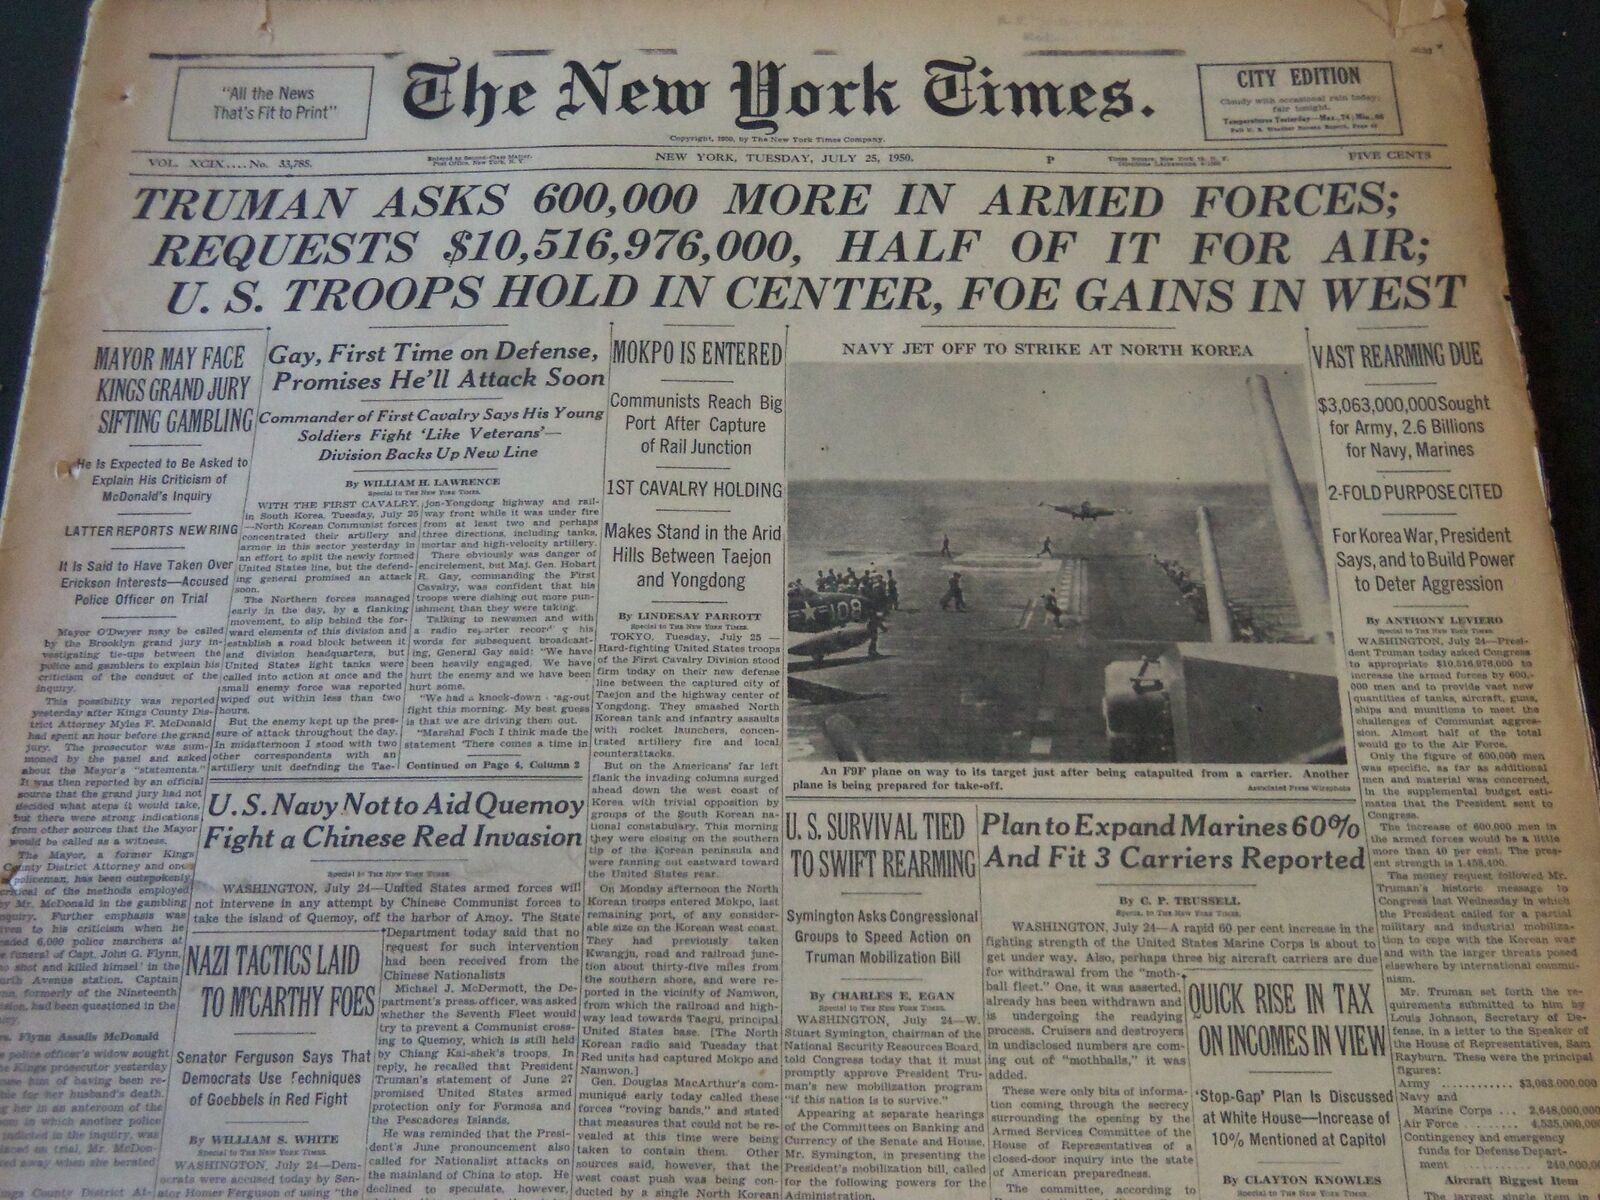 1950 JULY 25 NEW YORK TIMES - TRUMAN ASKS 600,000 MORE IN ARMED FORCES - NT 5960